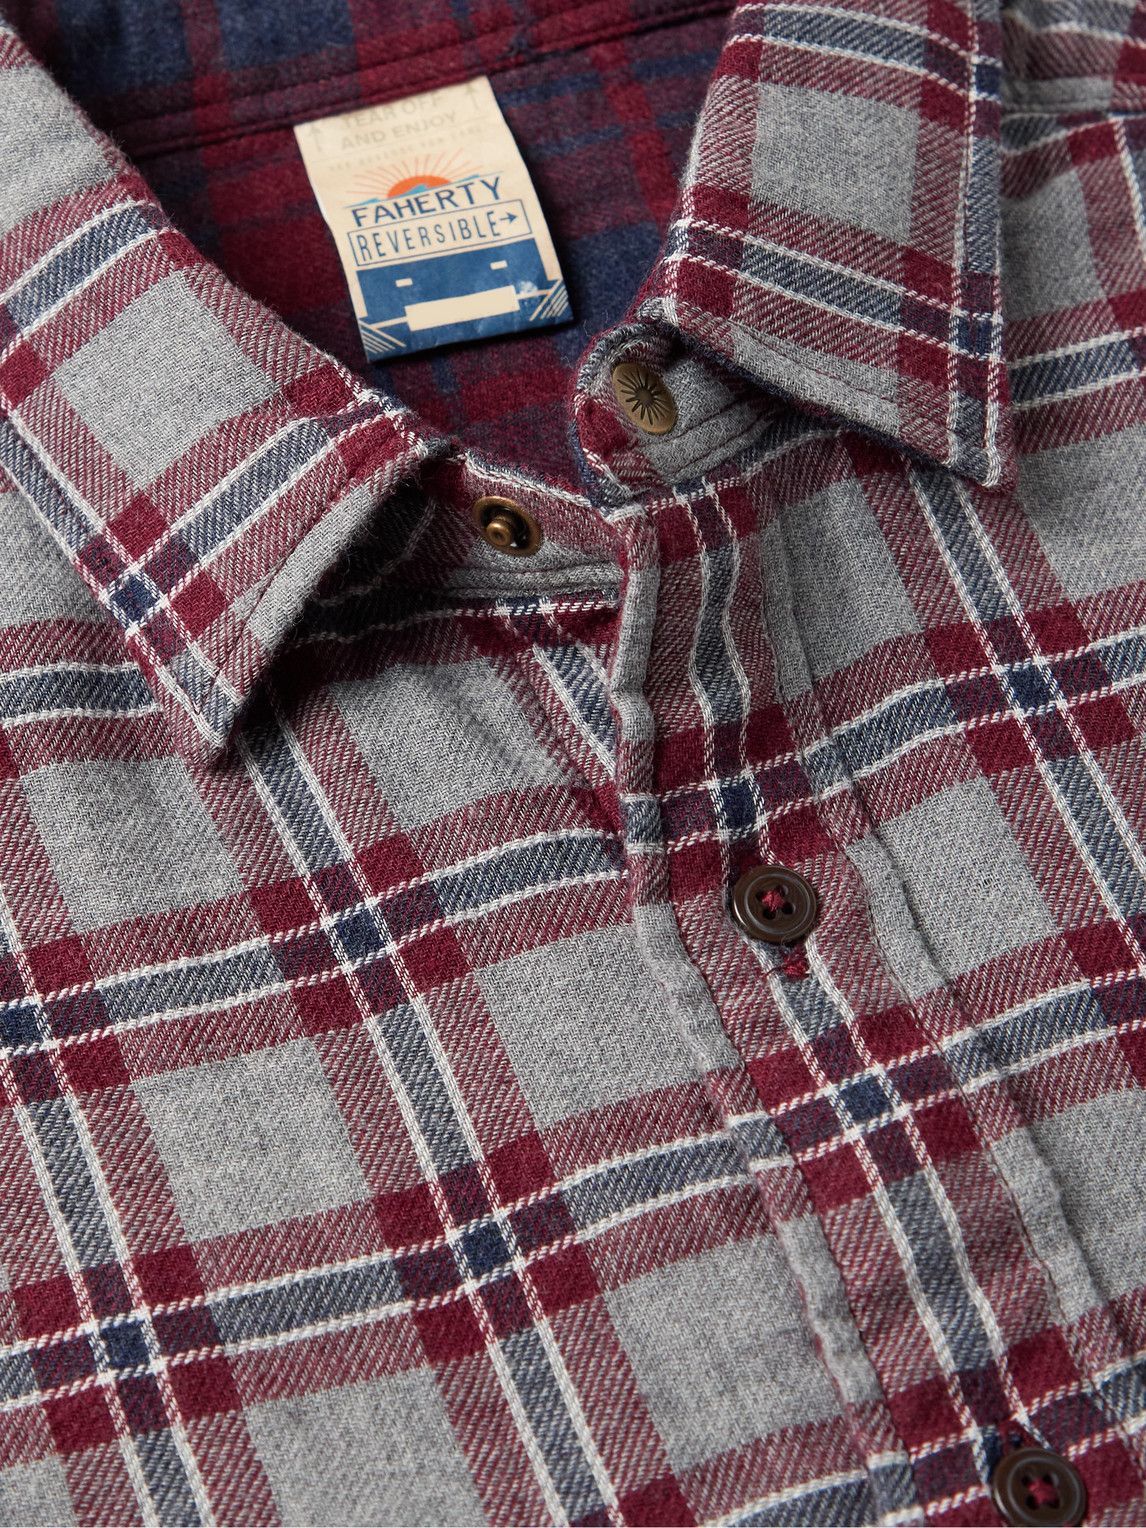 Faherty - Legend Reversible Checked Organic Cotton-Flannel Shirt - Red ...